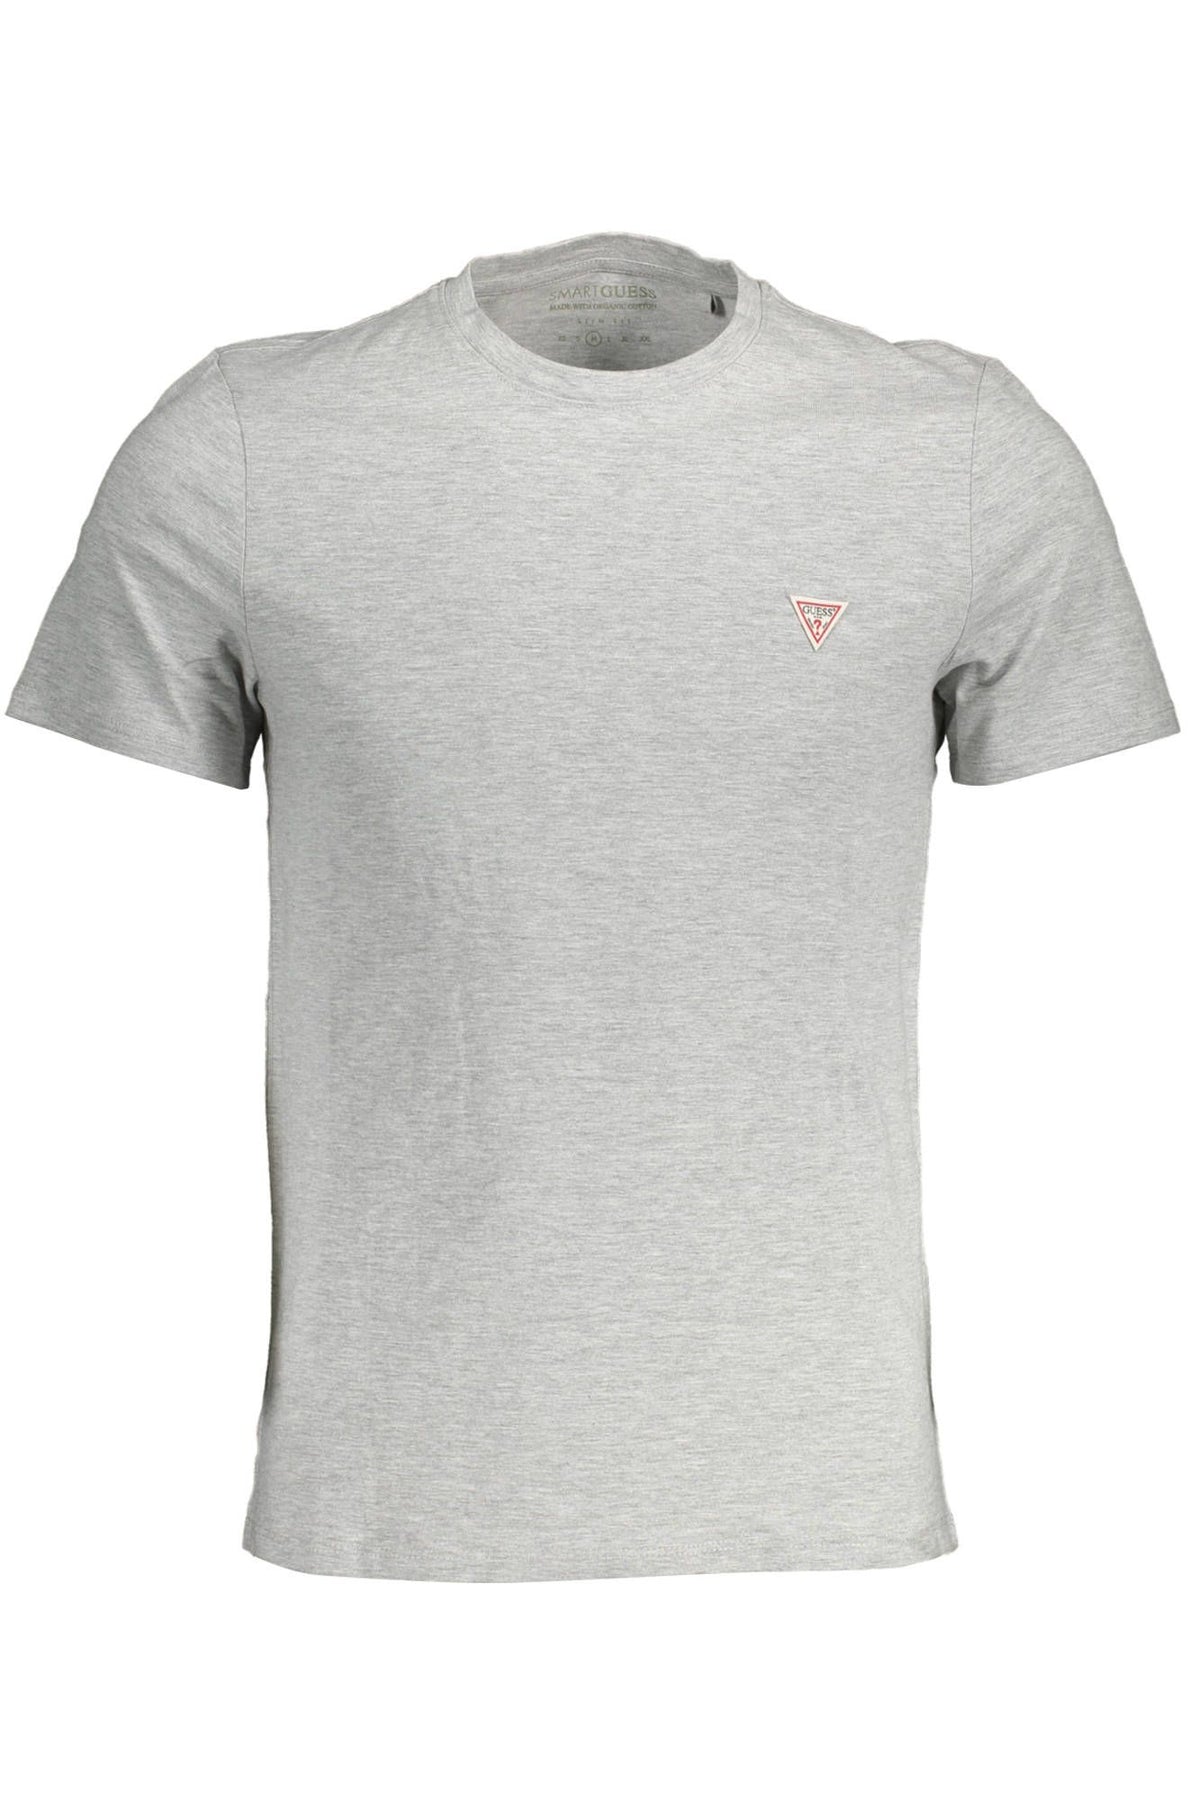 Guess Jeans Chic Gray Slim Fit Logo Tee for Men